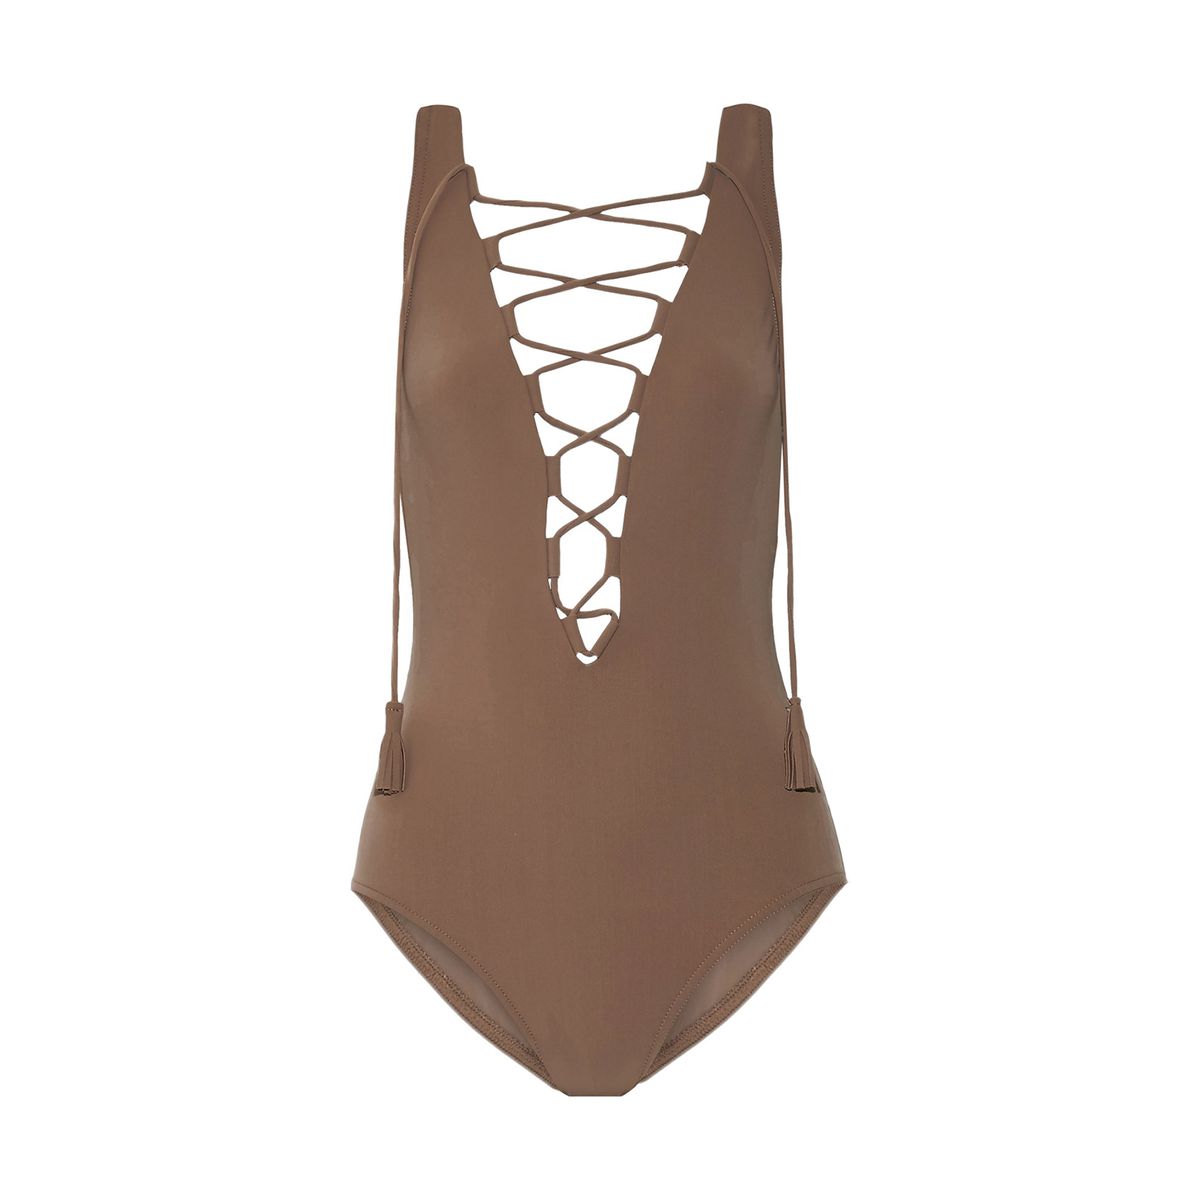 Entwined lace-up swimsuit